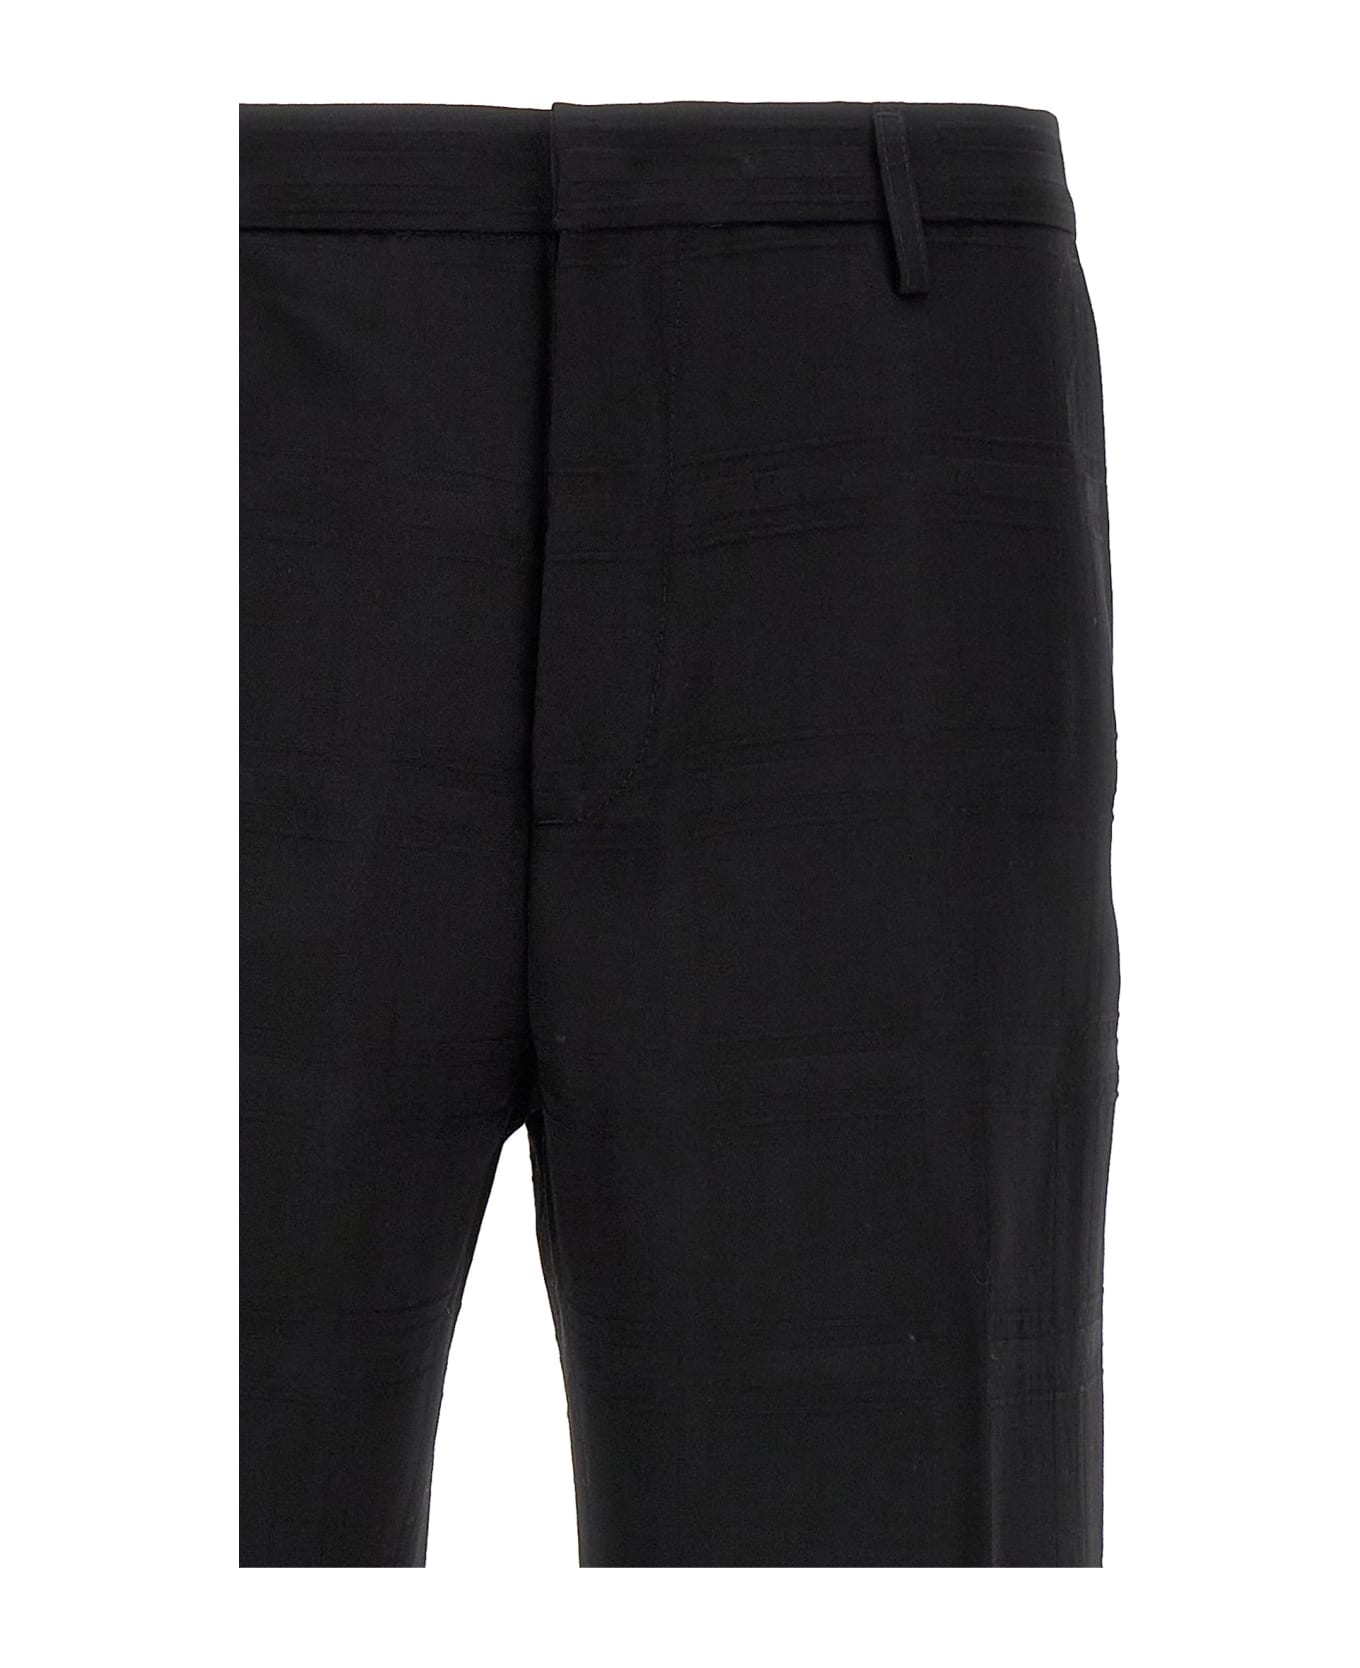 Etro Check Wool Trousers - Black  